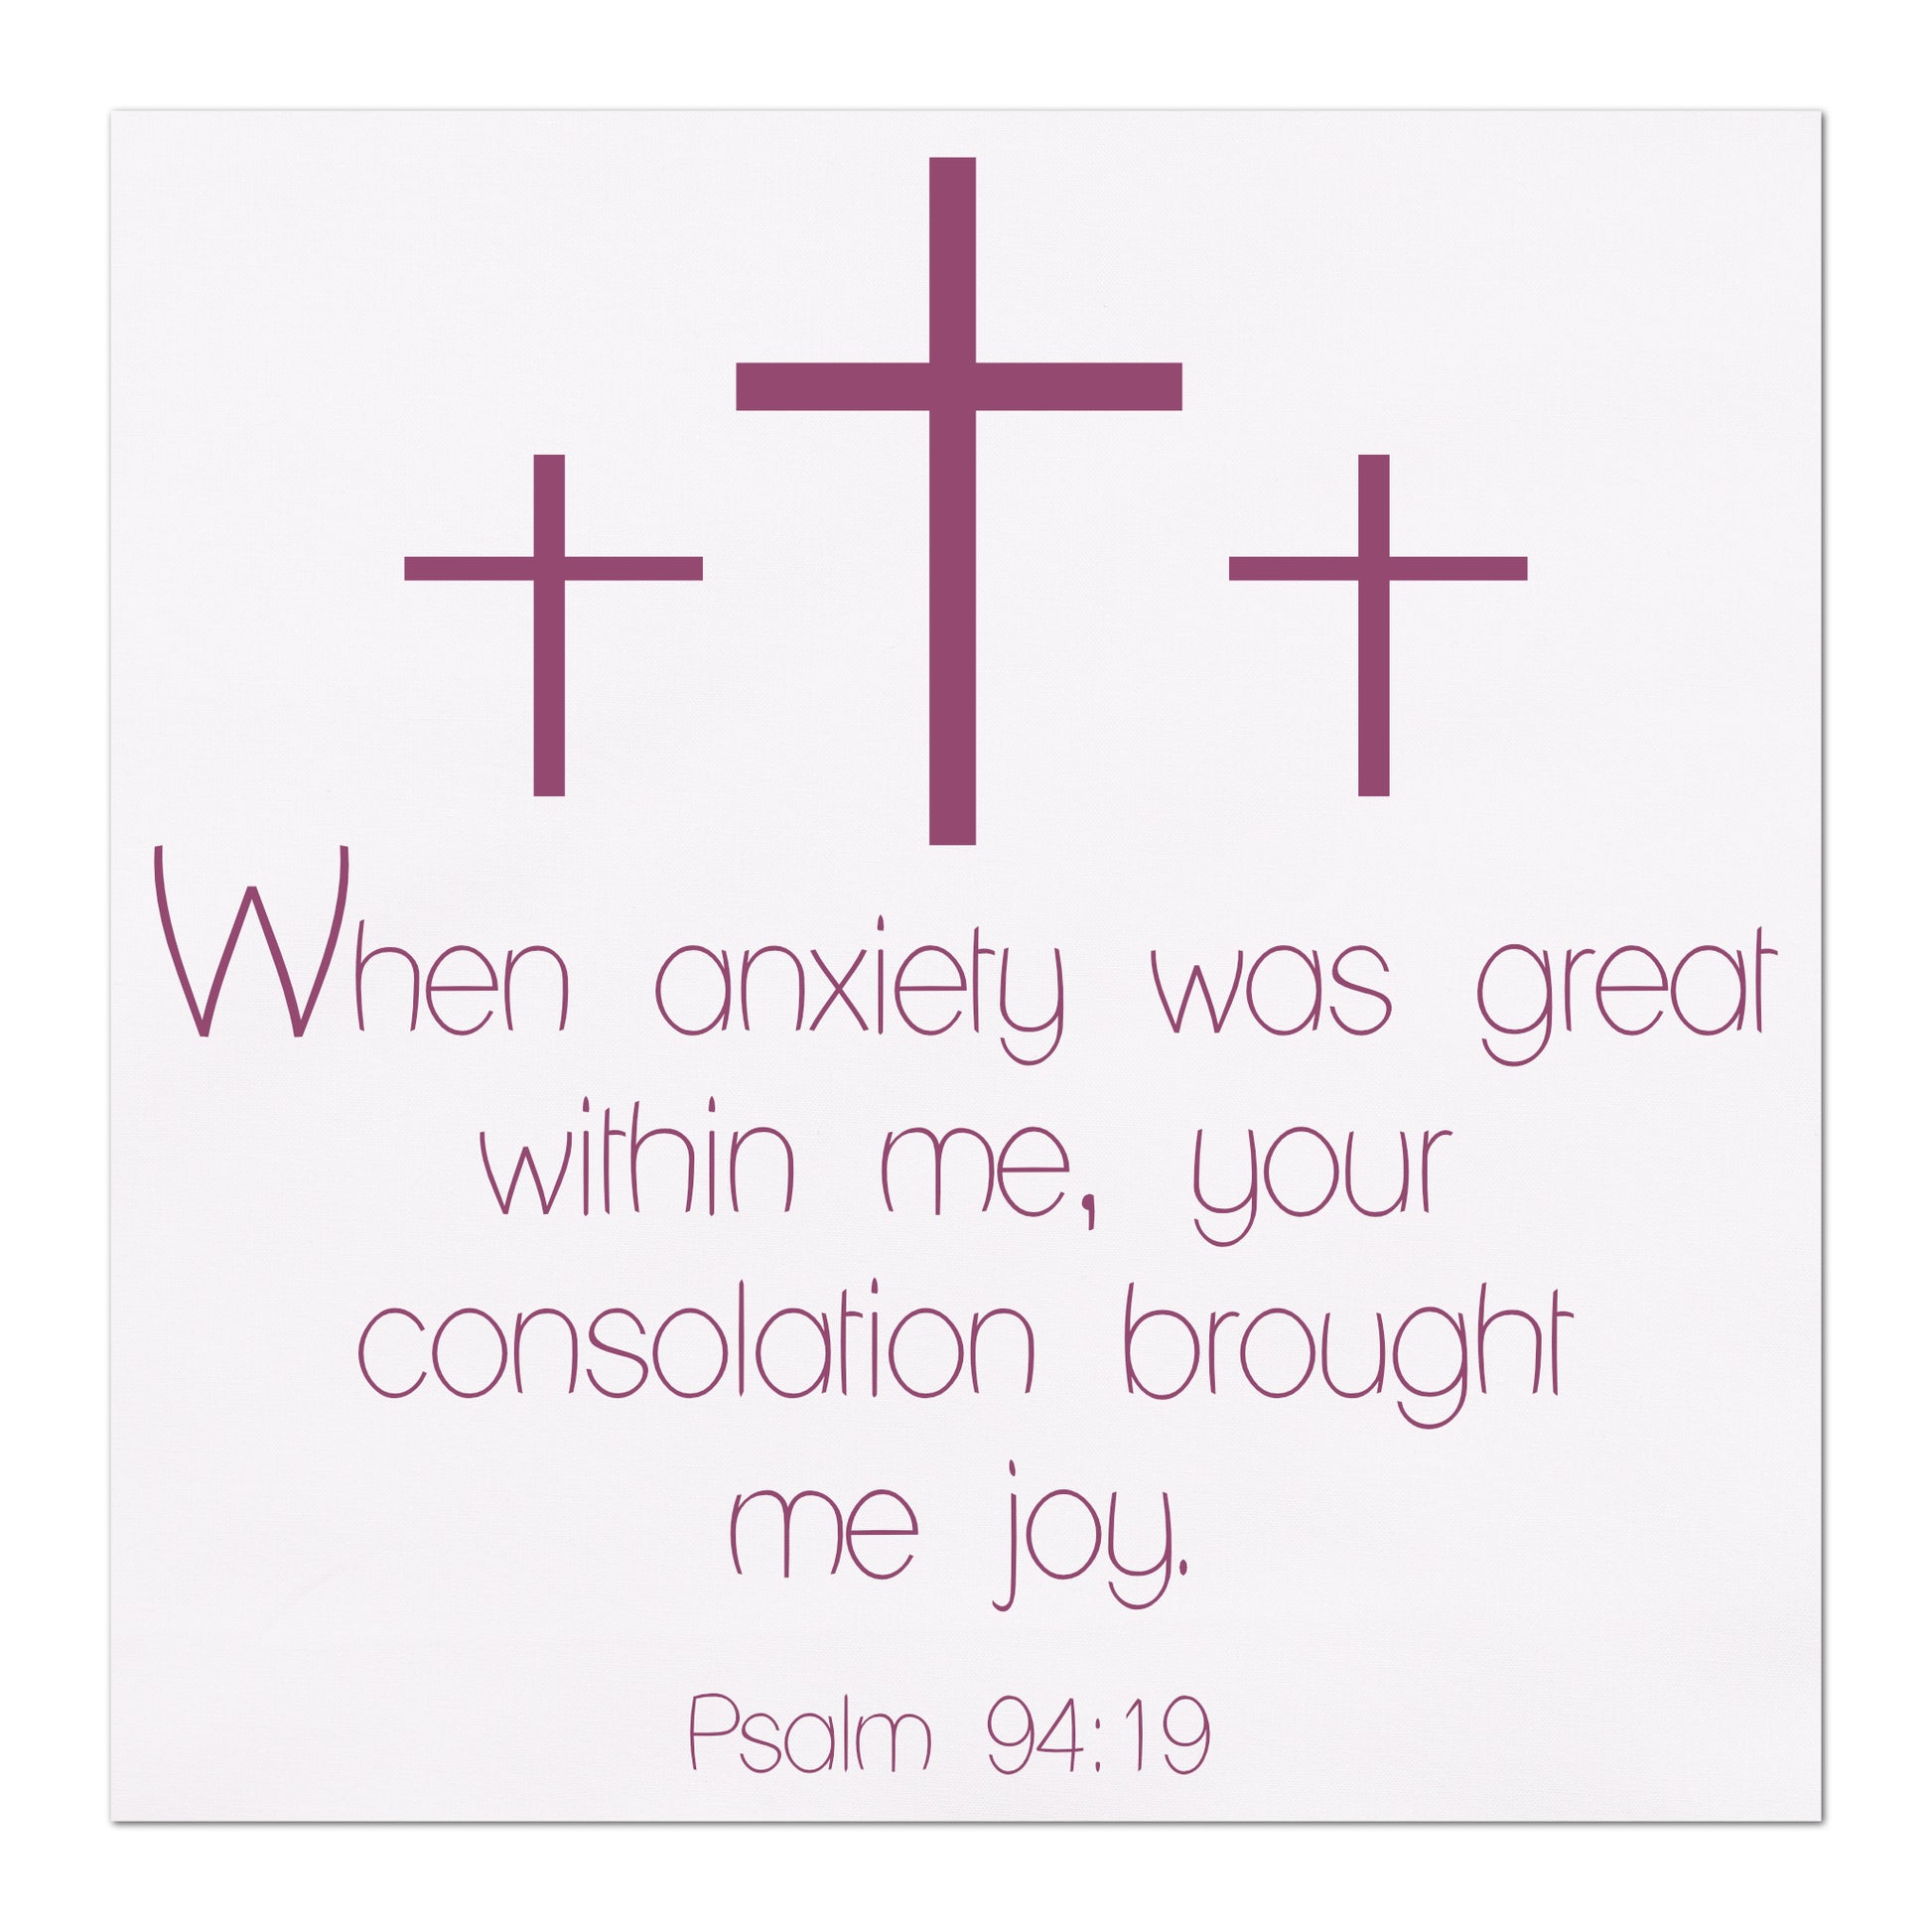 Psalm 94 19 - When anxiety was great within me, your consolation brought me joy.